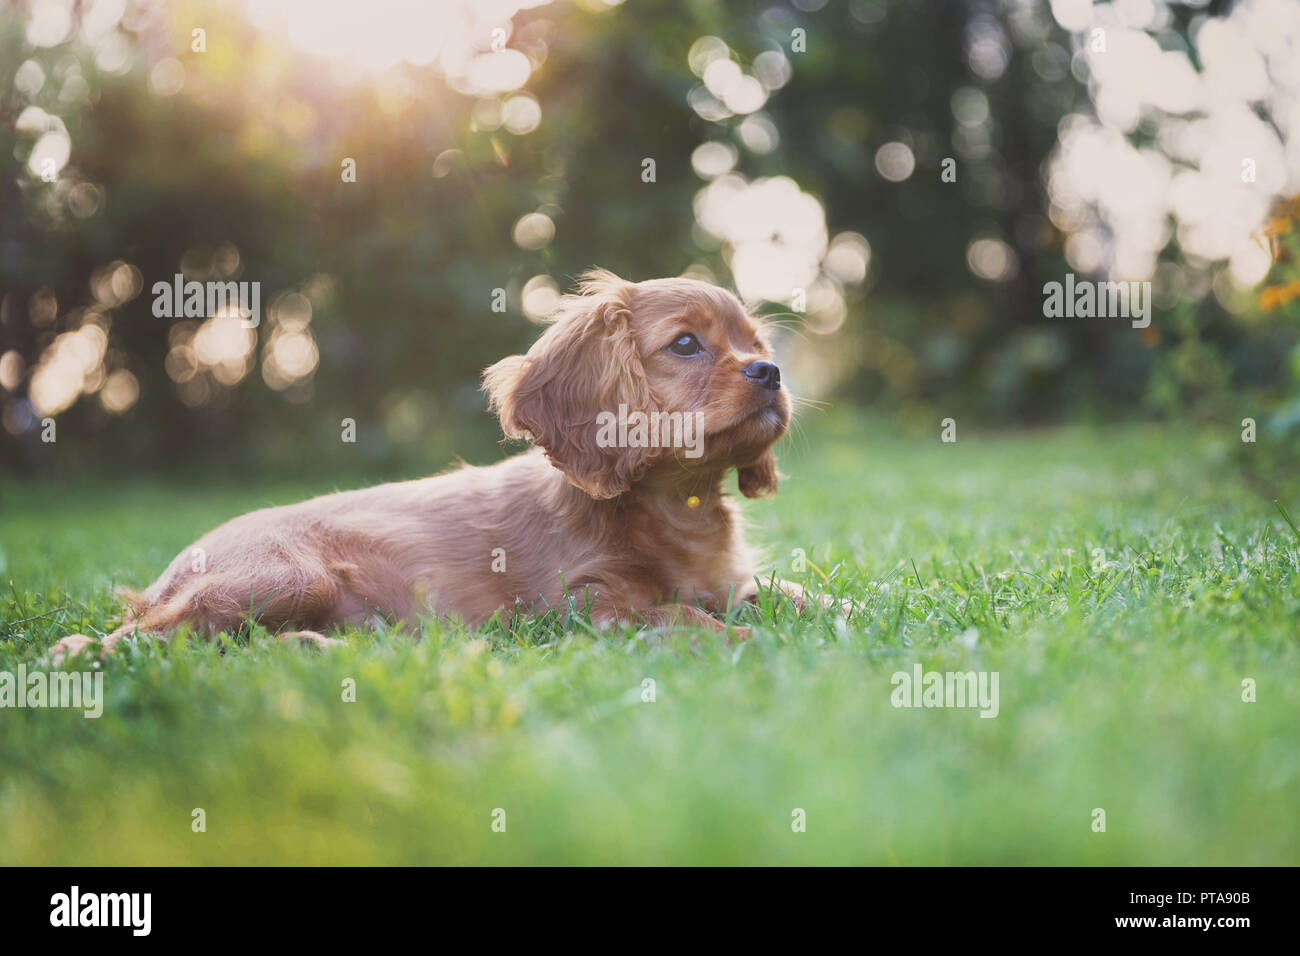 Cute puppy lying on the grass in the sunset light Stock Photo